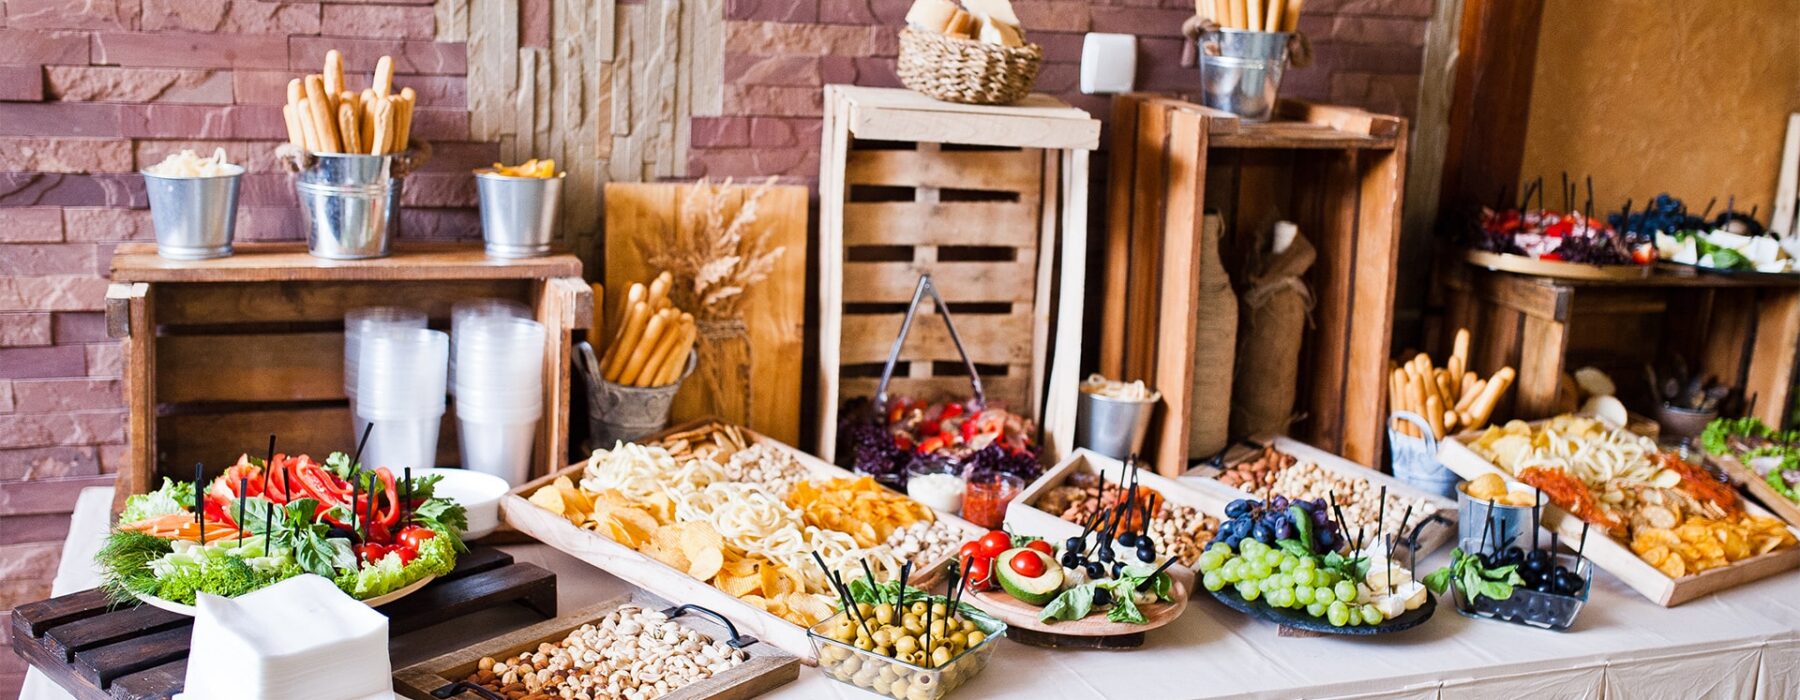 Bridal Shower Private Party Catering Ideas